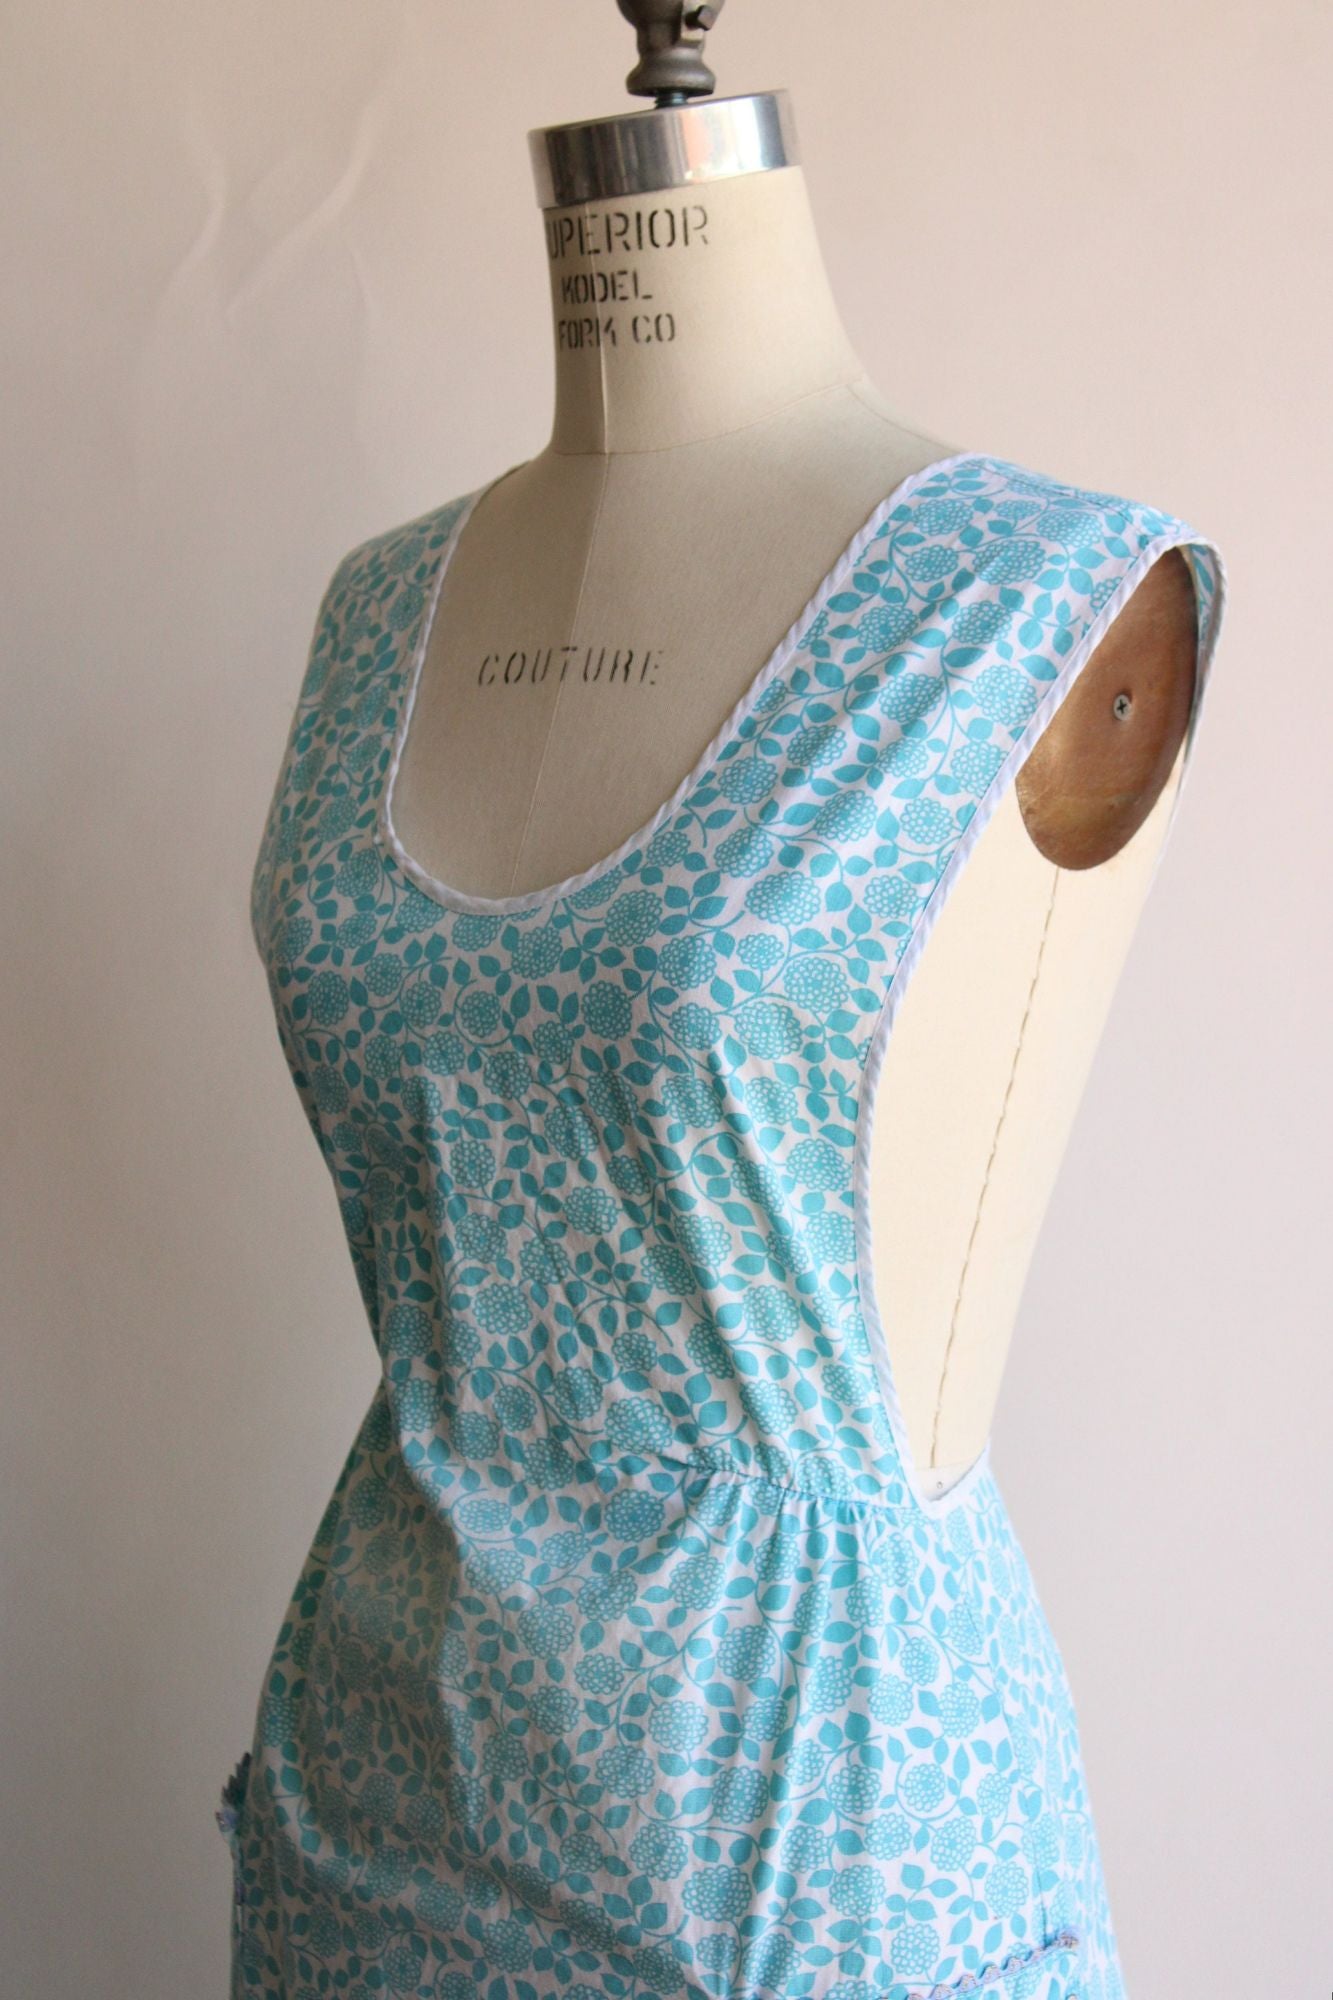 Vintage 1960s Blue Floral Pinafore Apron with Pockets